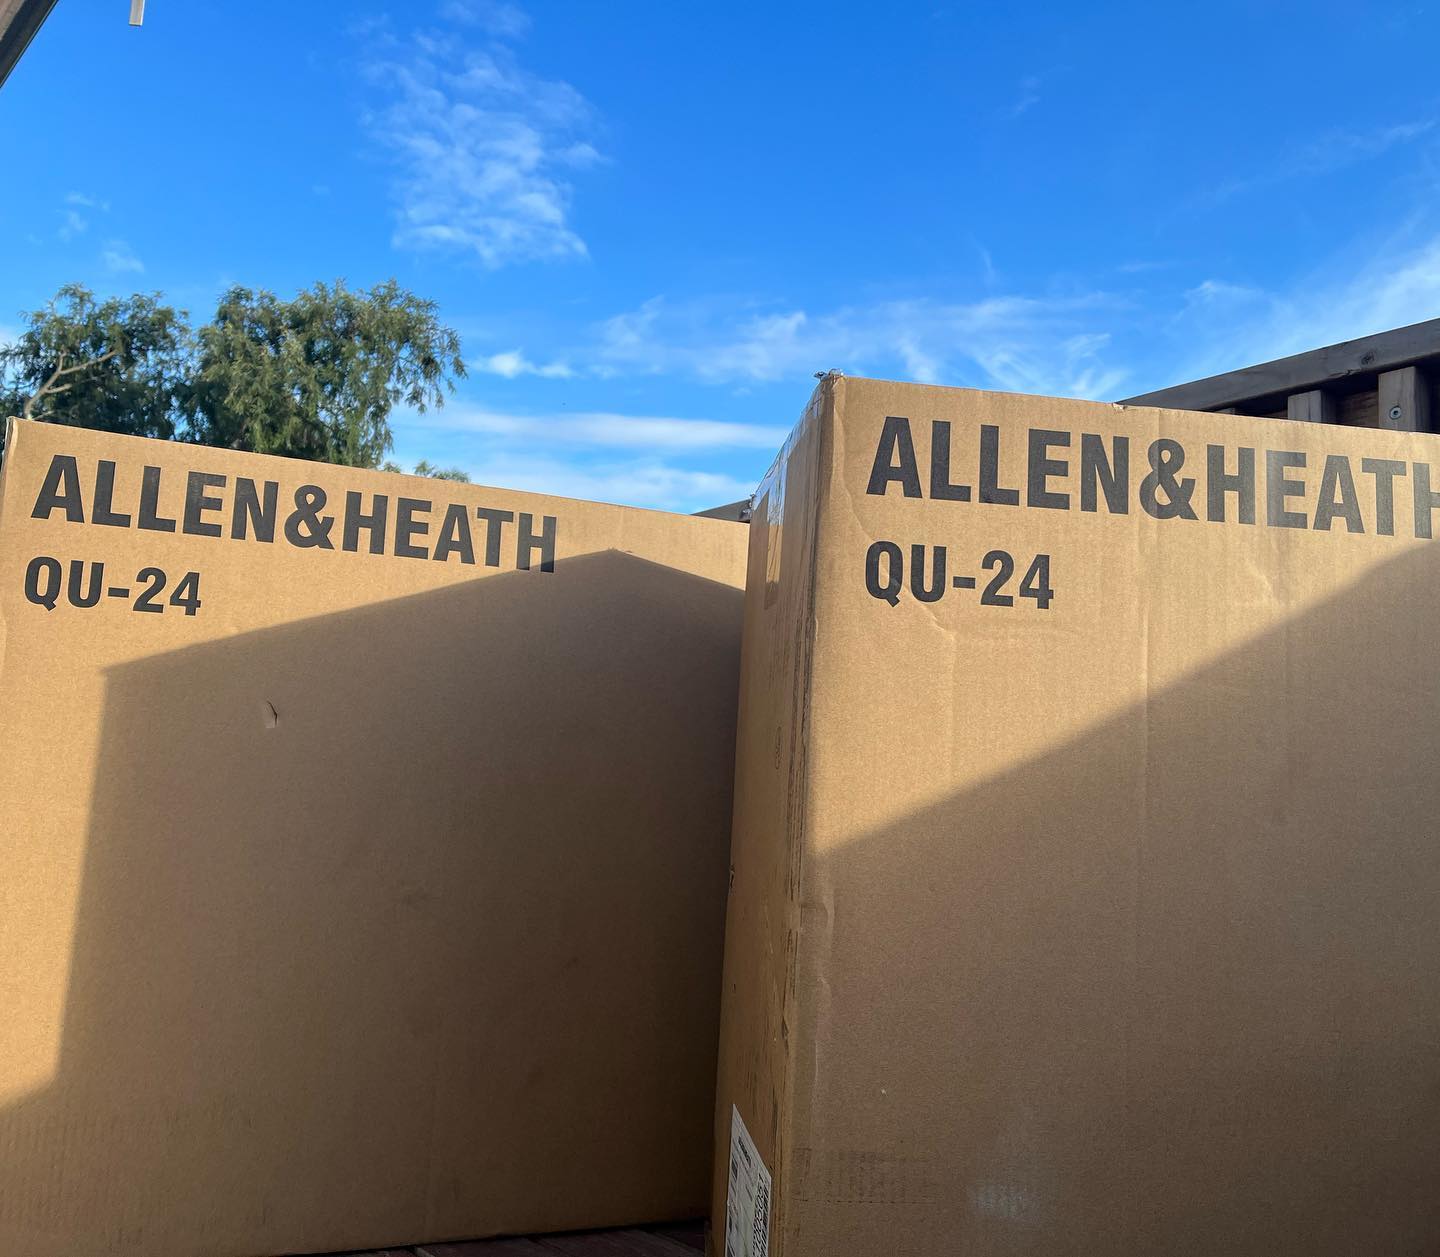 Twin @allenandheath QU-24 digital audio consoles have just landed for a special someone.

VenueTech are dealers/resellers for a wide range of technical production and stage equipment. If your creative space needs a boost of new kit, or a restock of bits and pieces, don’t hesitate to get in touch. 

With over decade of caring for the prestigious Theatre Royal and NCMA, our focus is to provide professional-grade products, practical advice and industry-leading technical support that will inspire confidence to perform at your best - all right here in Whakatū.